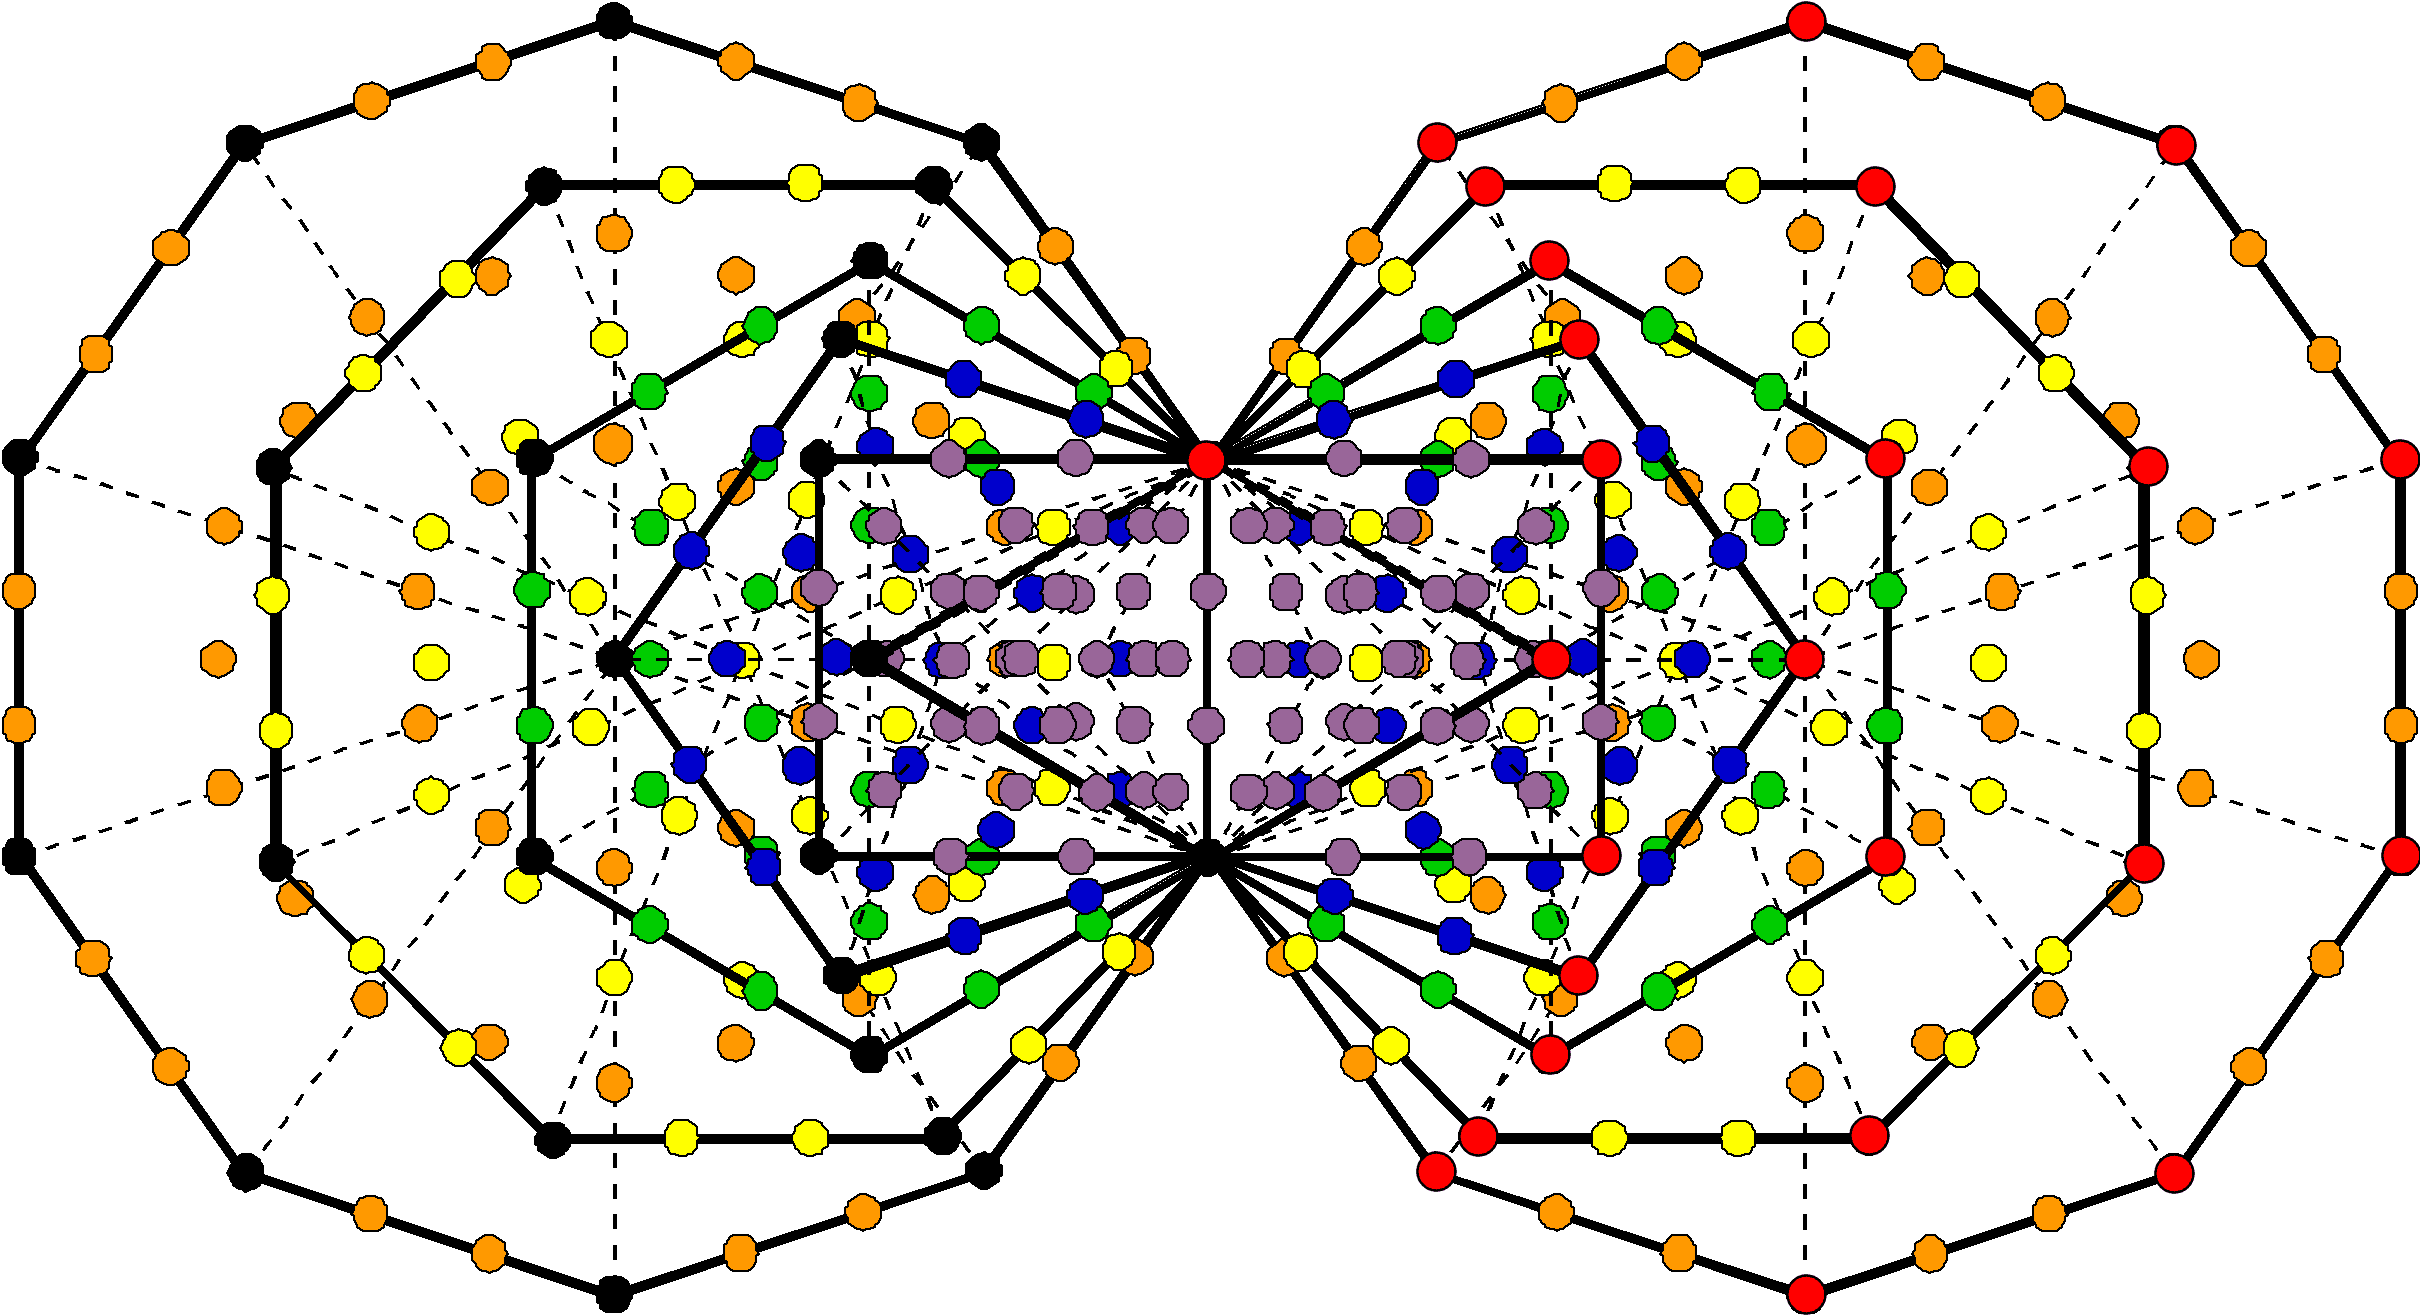 (168+168) yods other than corners in 1st (6+6) enfolded polygons